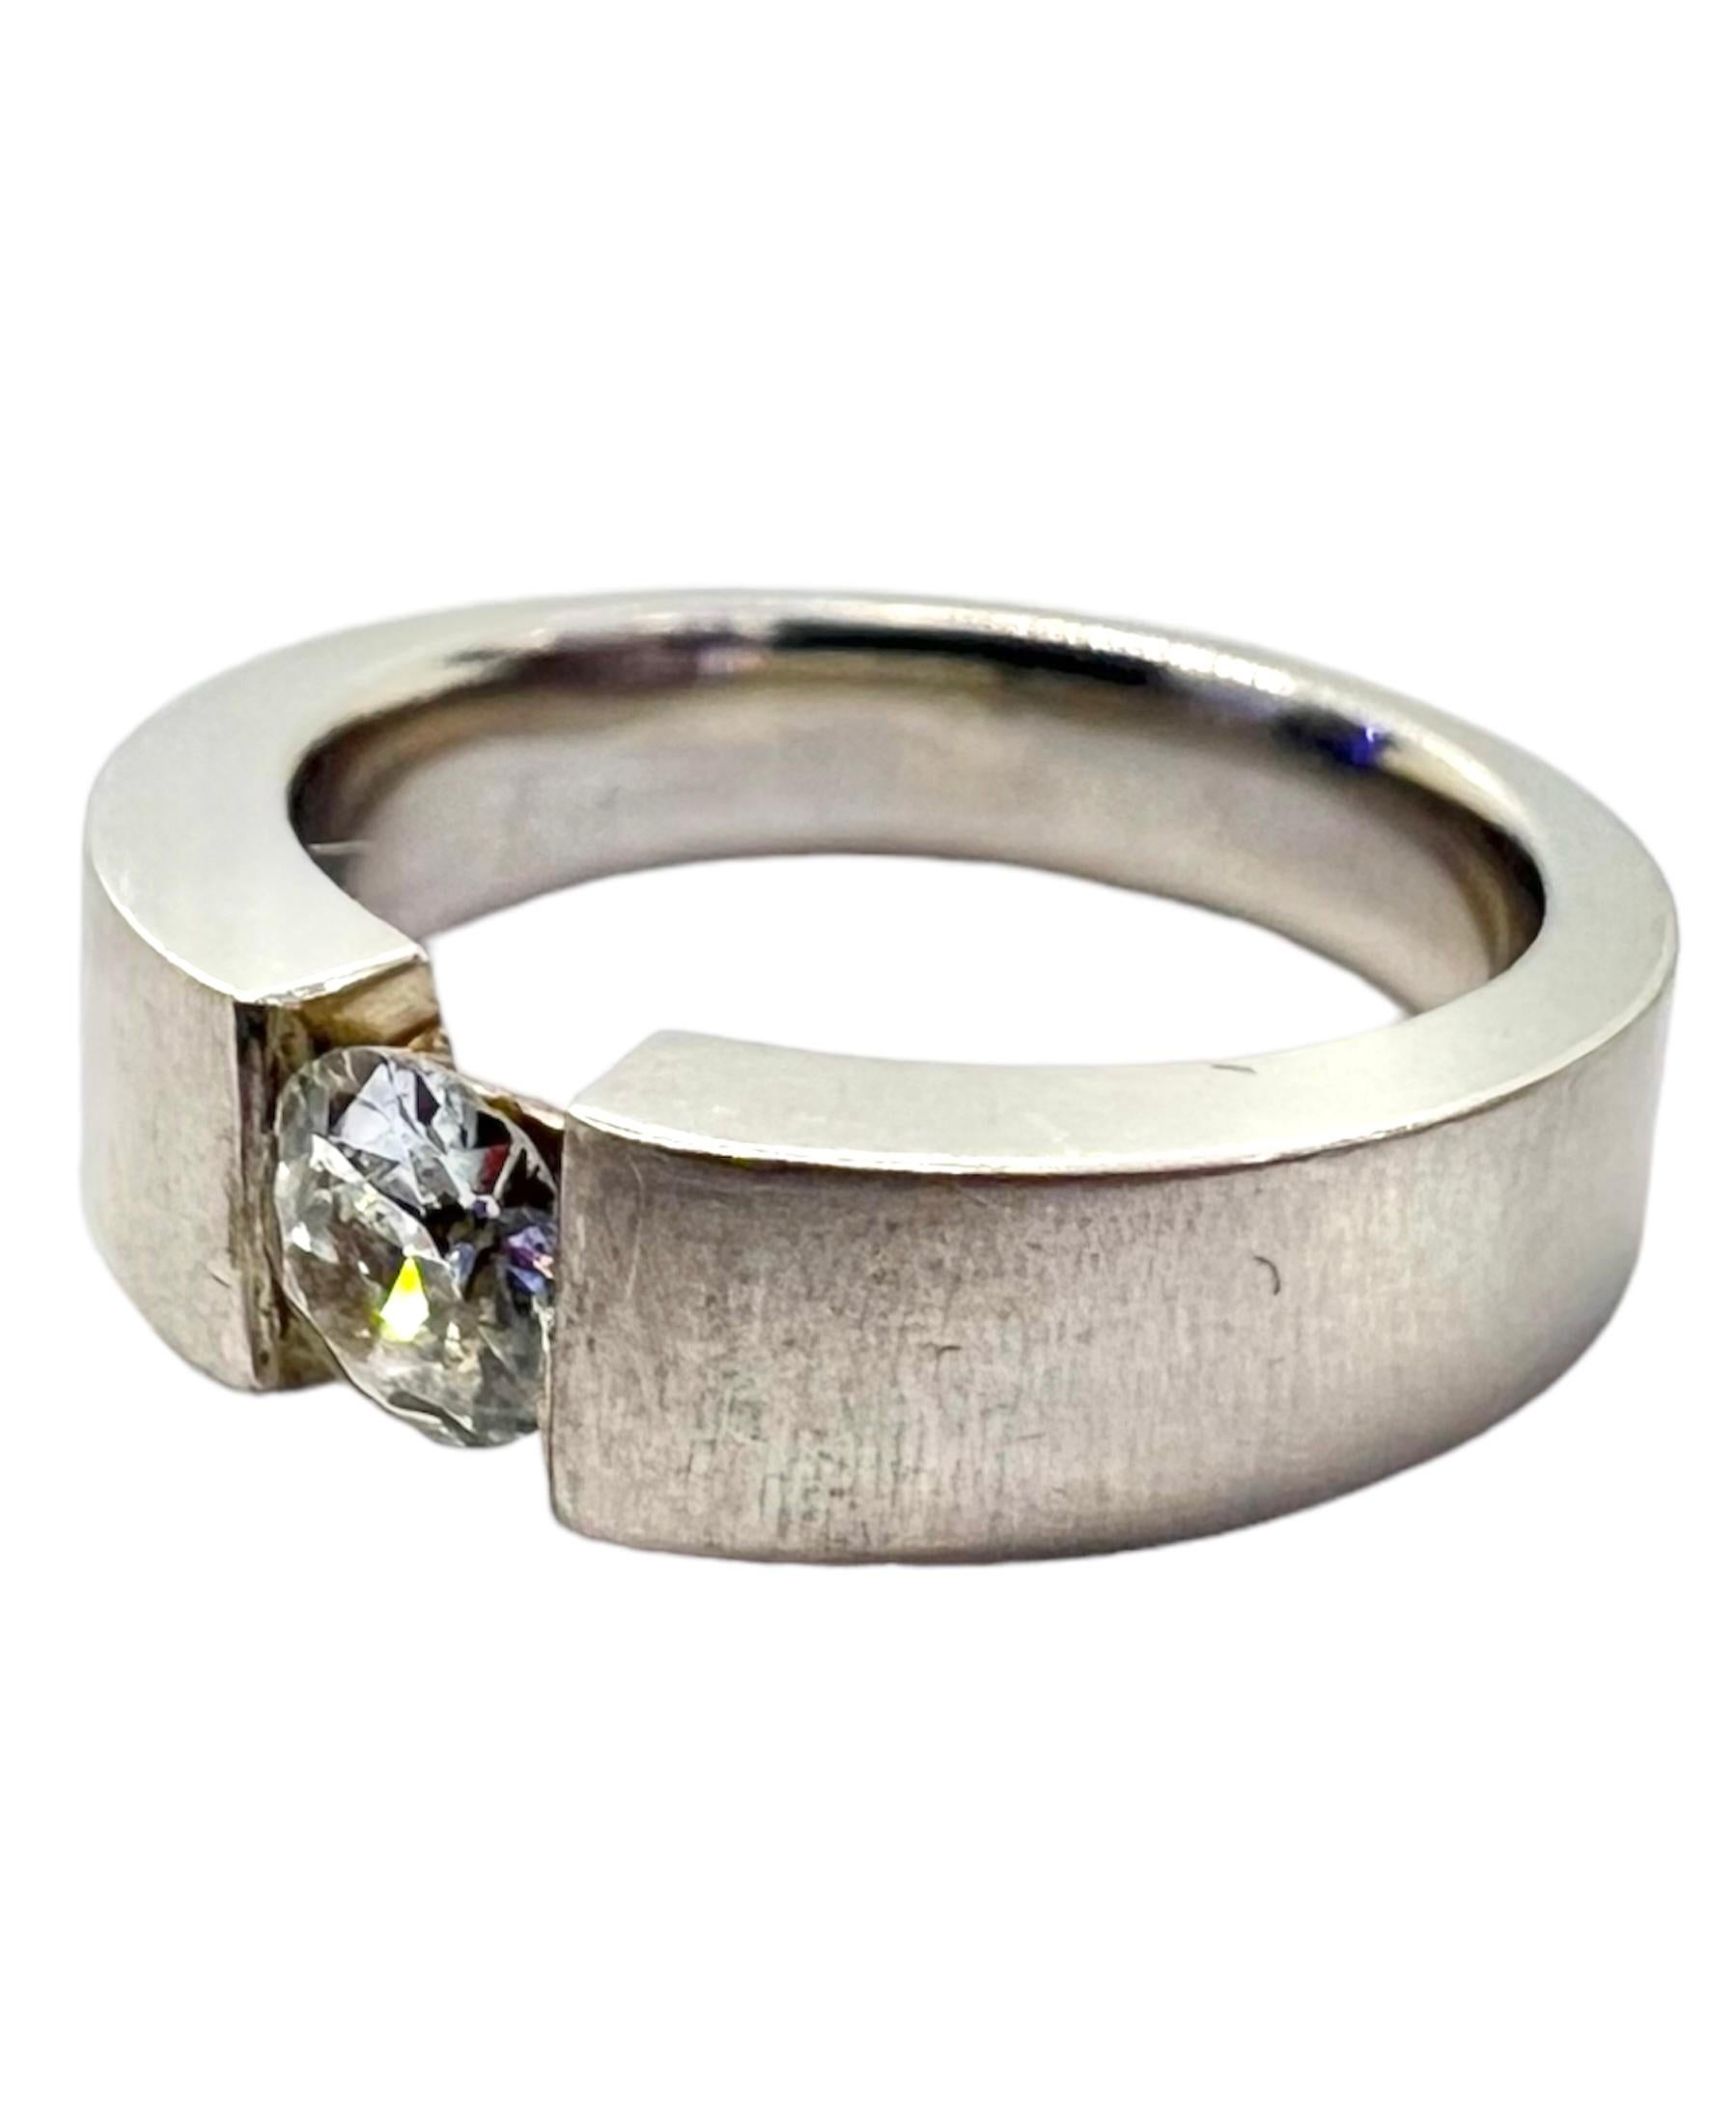 Platinum ring with round cut diamond.

Sophia D by Joseph Dardashti LTD has been known worldwide for 35 years and are inspired by classic Art Deco design that merges with modern manufacturing techniques.  